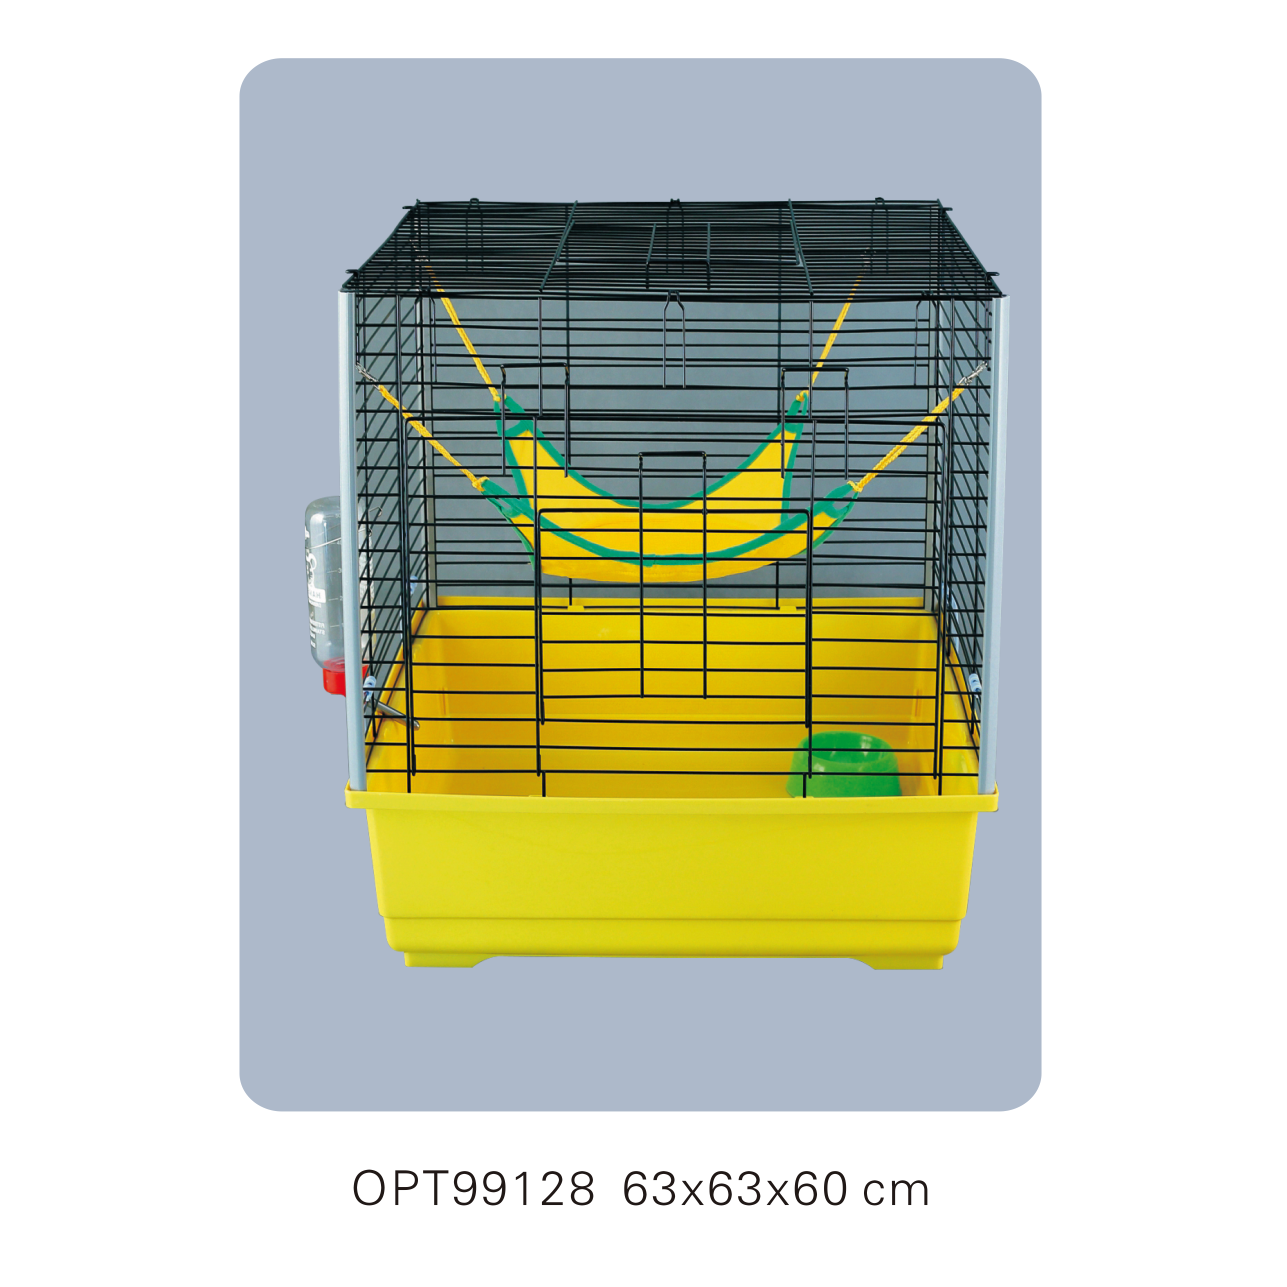 OPT99128 63x63x60cm small animal cages